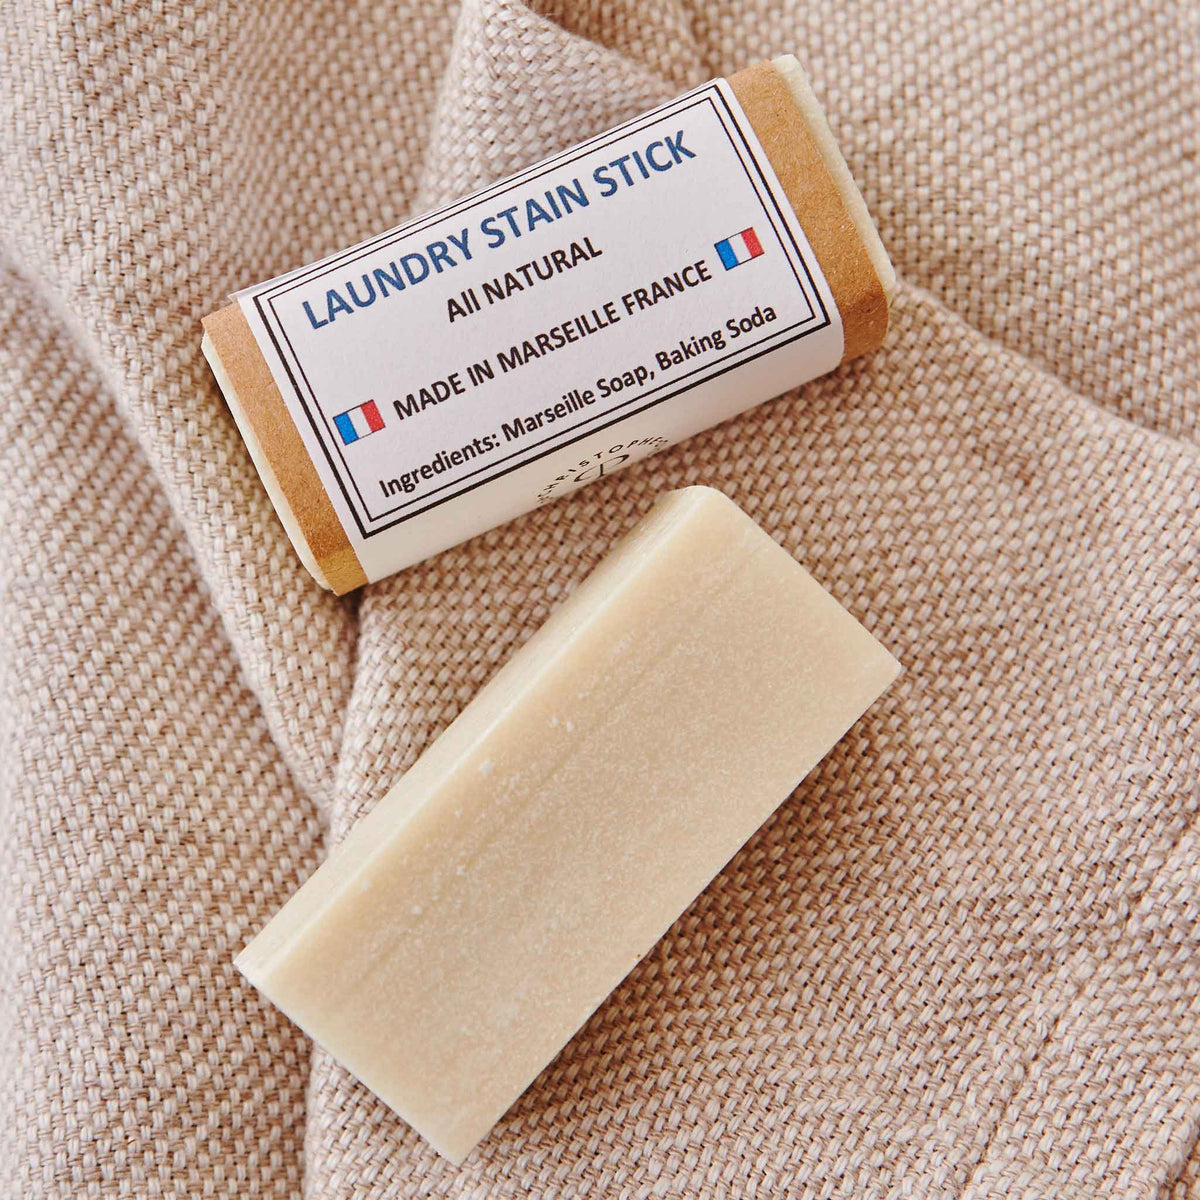 CHRISTOPHE POURNY LAUNDRY STAIN STICK